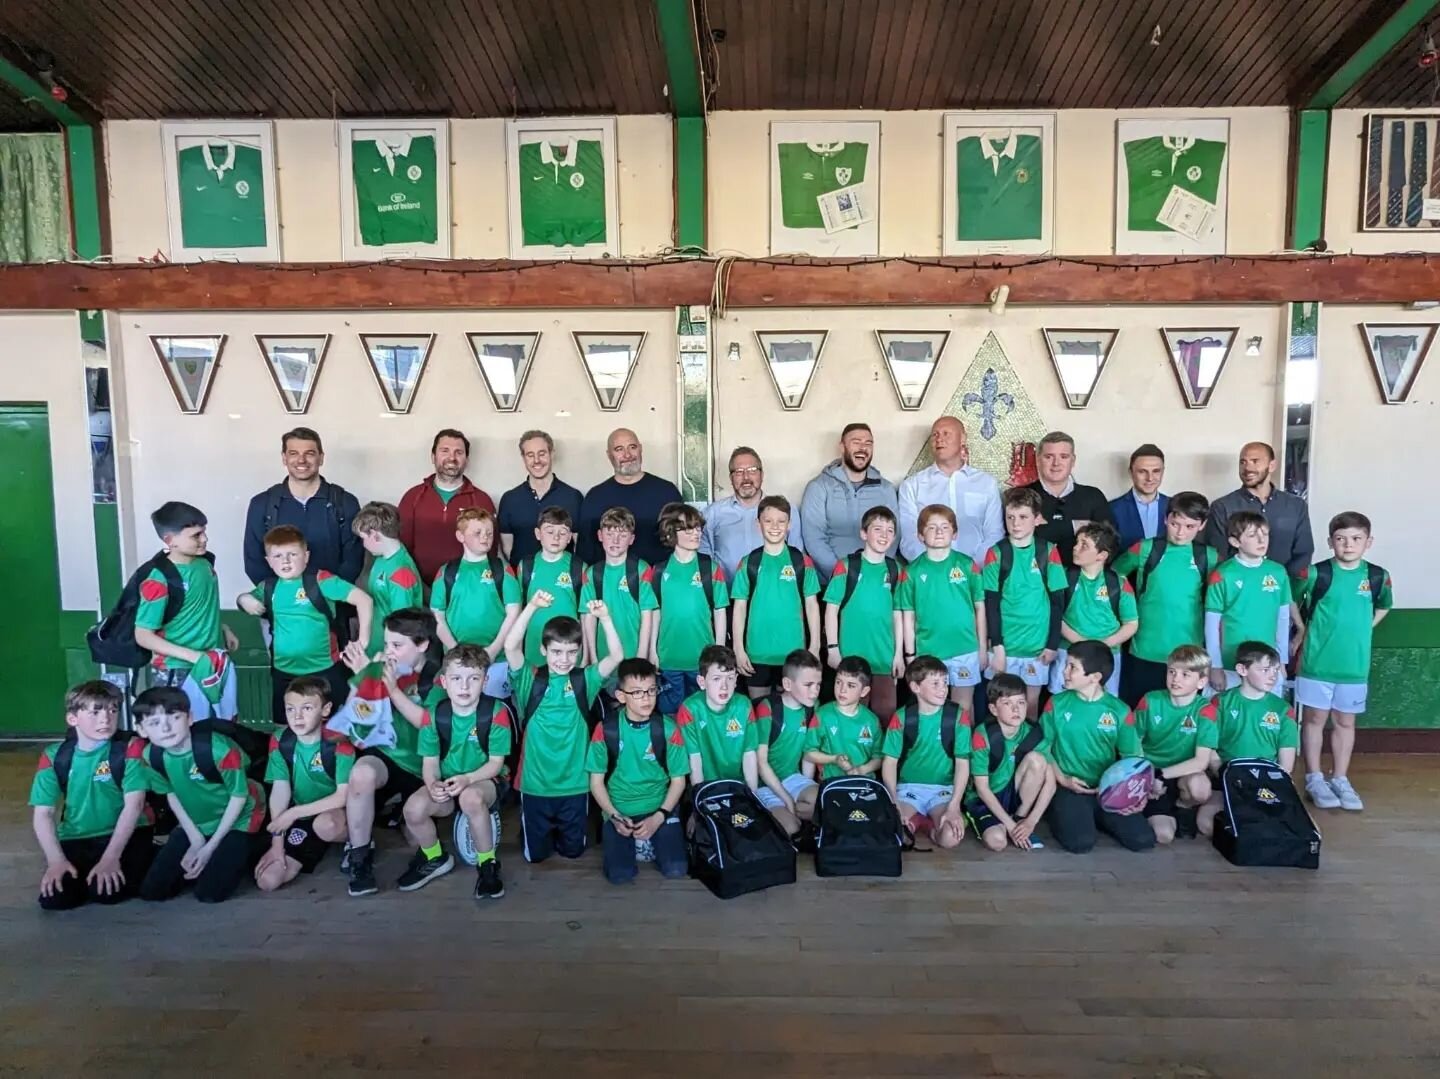 Good luck to the Bective Mini's heading over to @londonirish1898 for the International Mini's Tournament this Sunday. Thanks to Leinster, Ireland &amp; British &amp; Irish Lions player @robhenshaw for presenting the gear and talking about his own mem